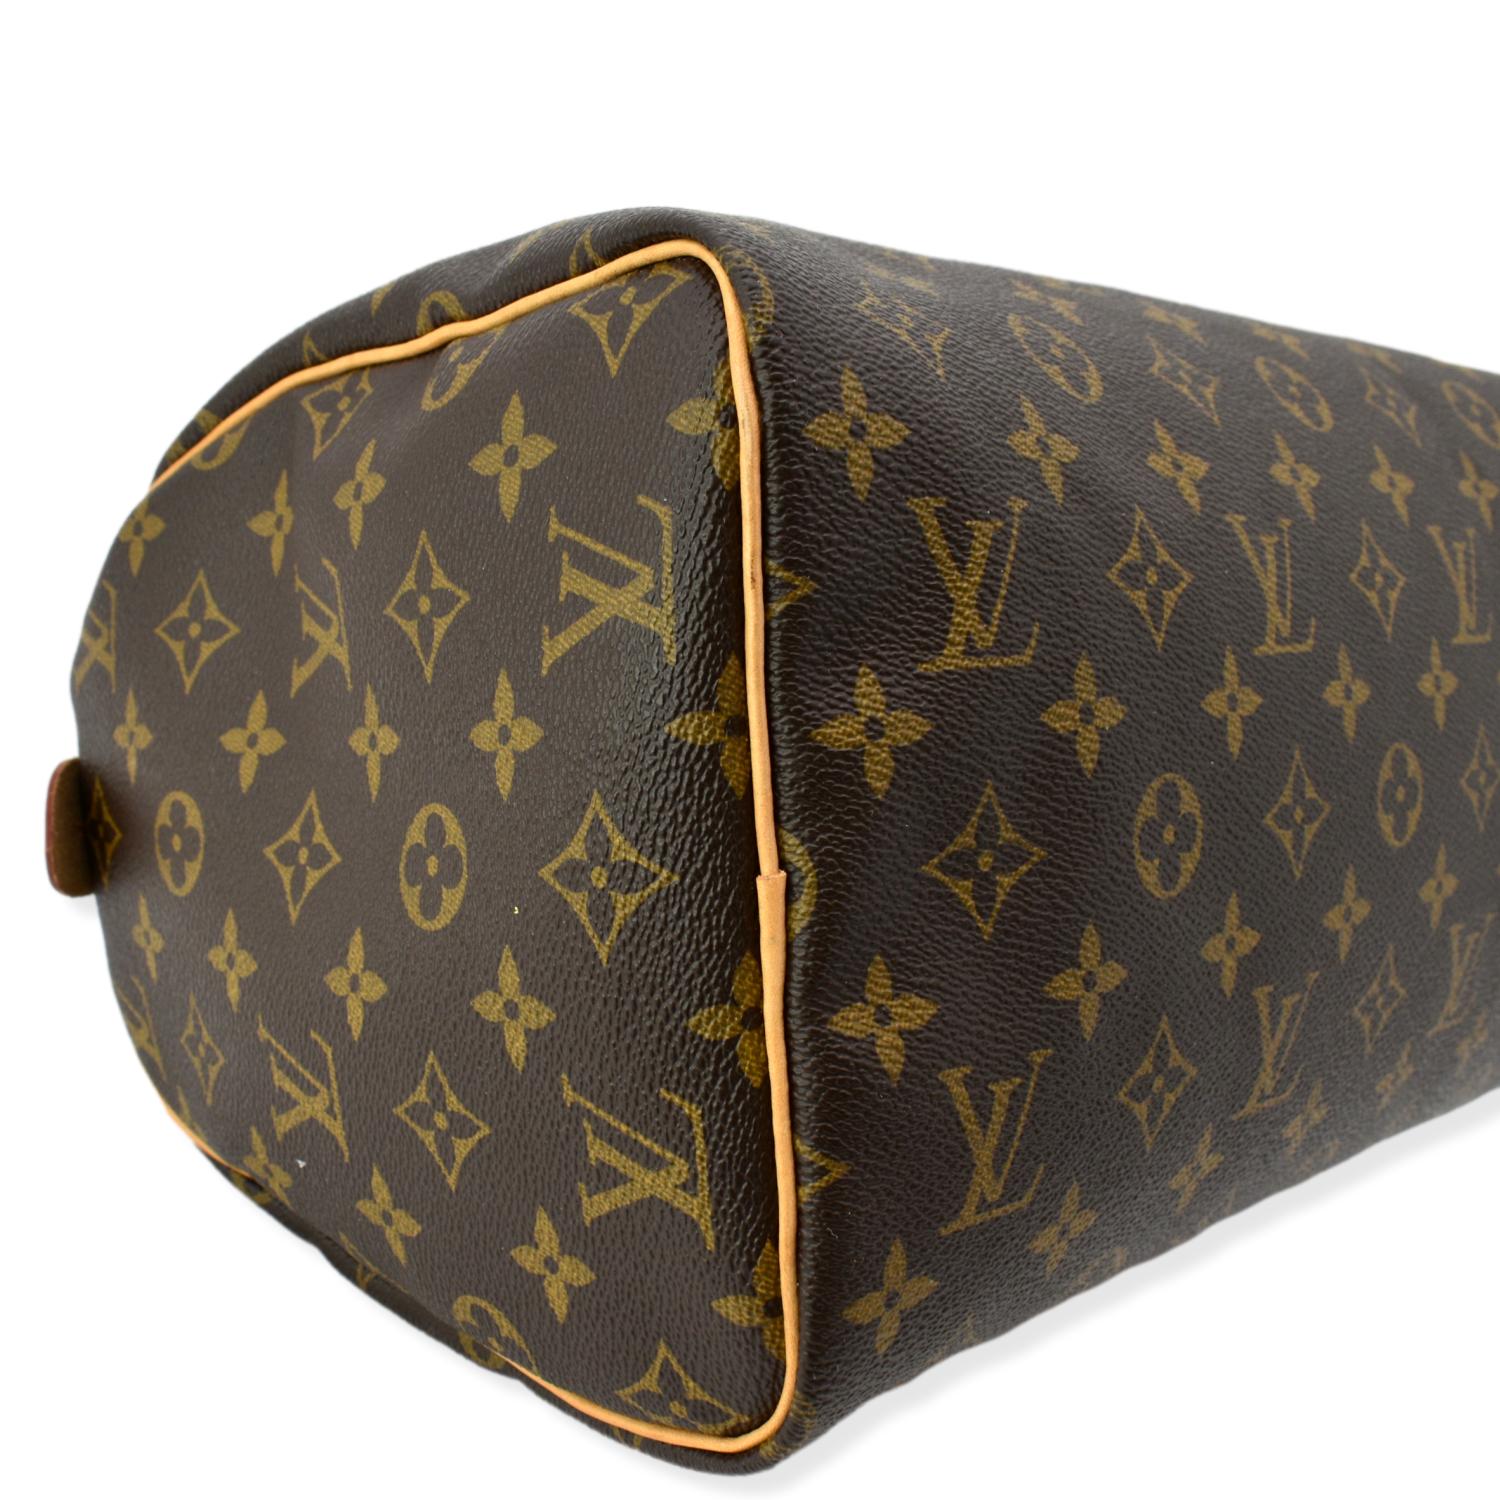 louis vuitton code check by andy haffle - Issuu